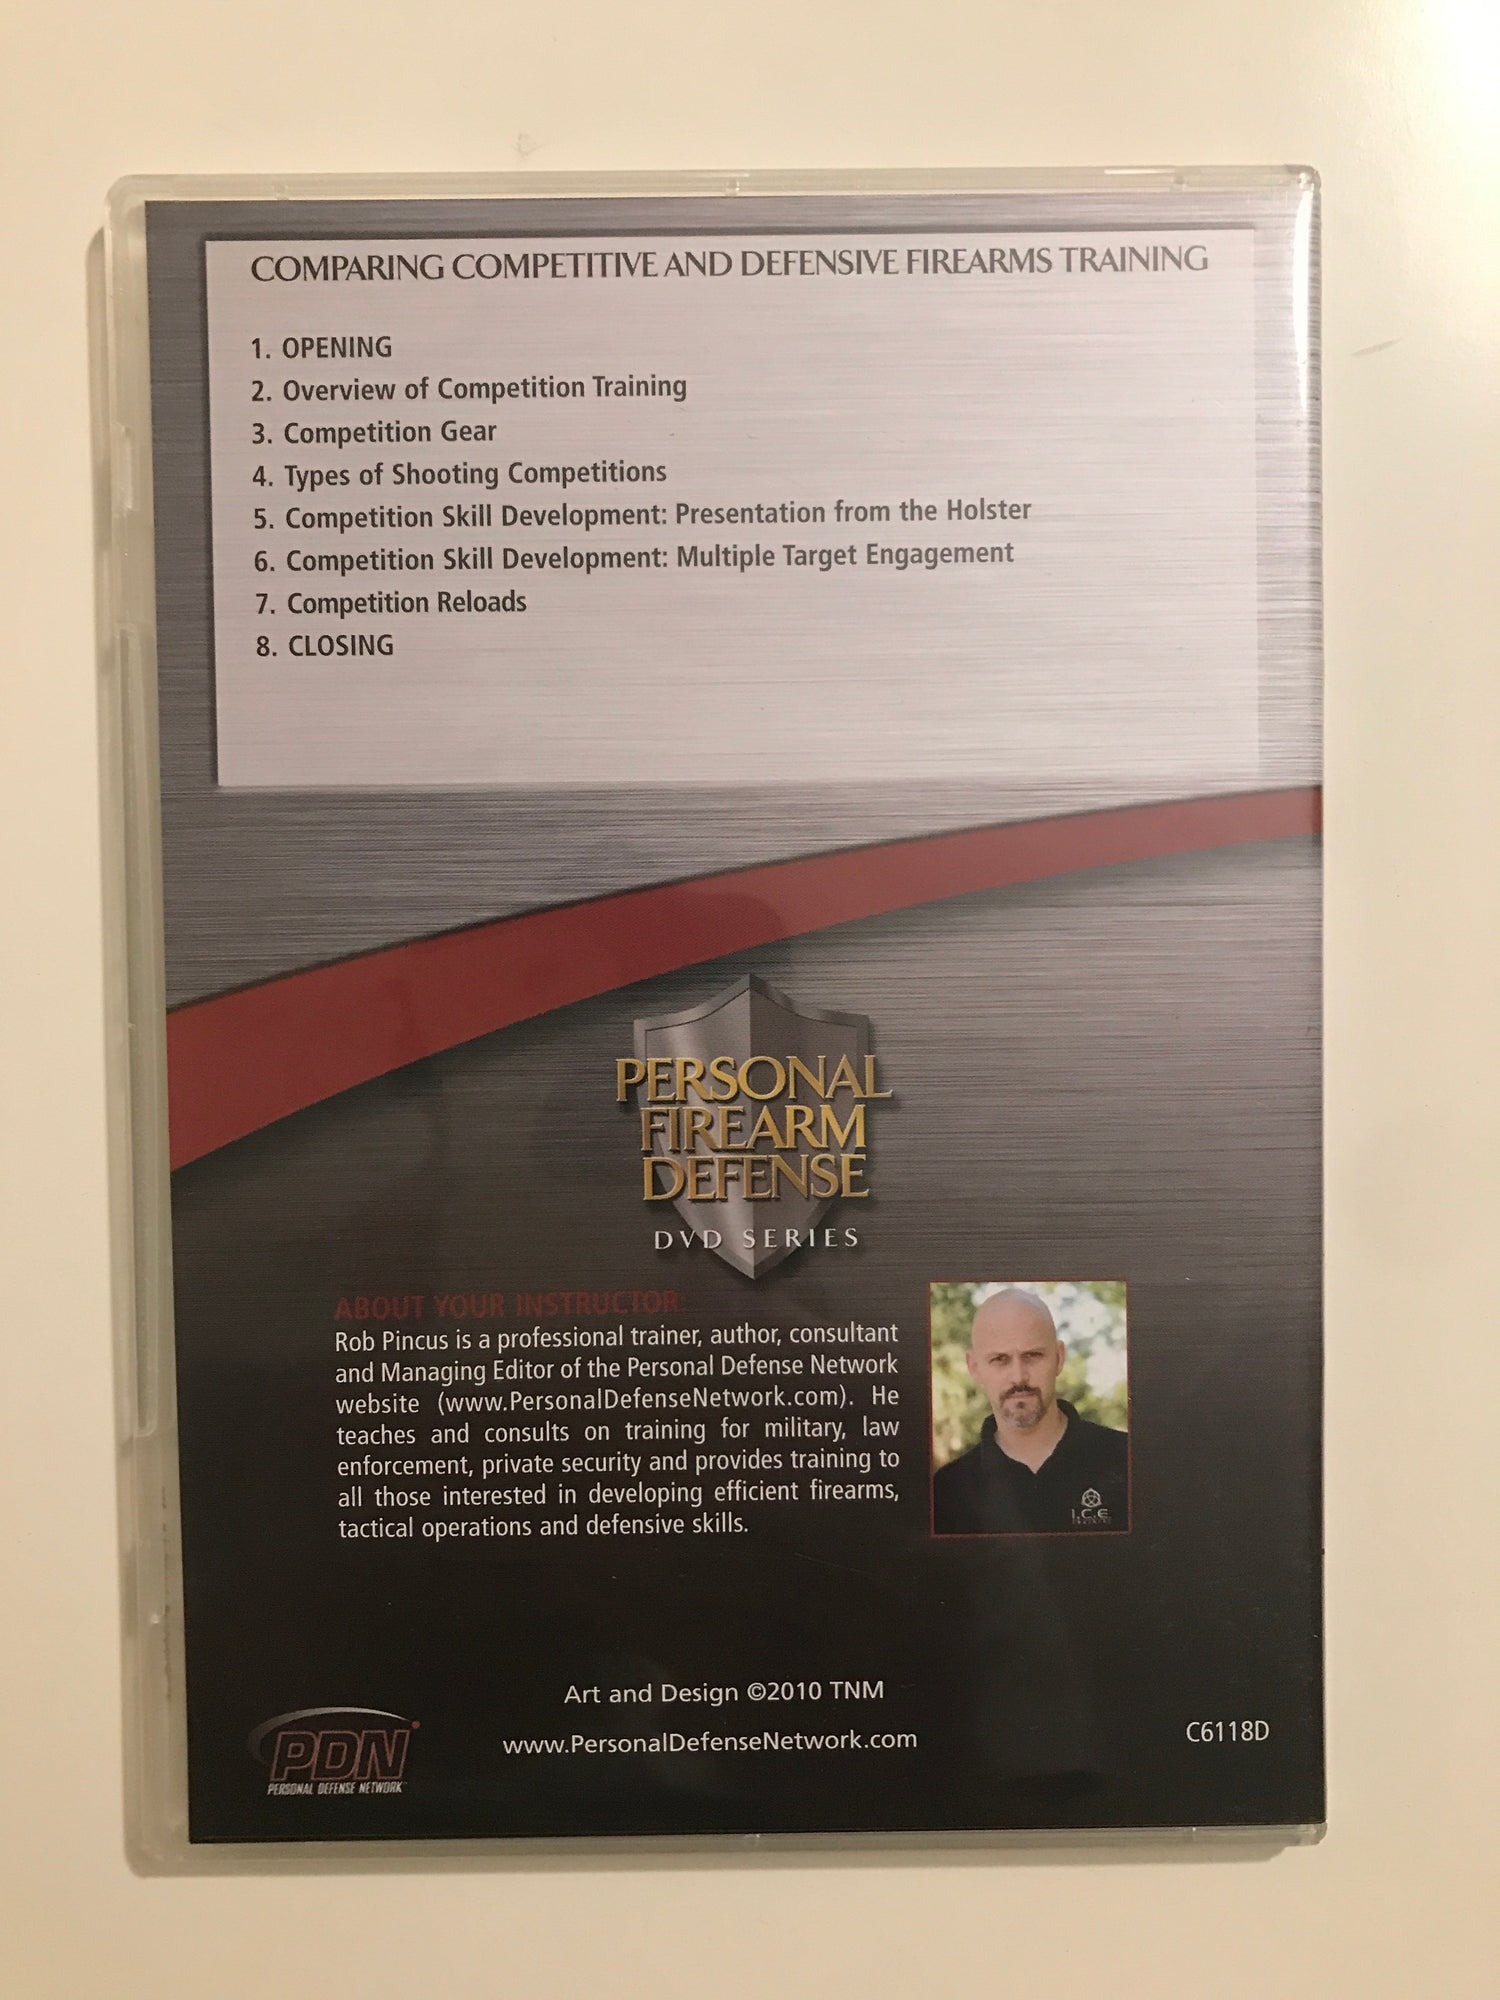 Personal Firearm Defense: Comparing Competitive & Defensive Firearms Training DVD by Rob Pincus (Preowned) - Budovideos Inc